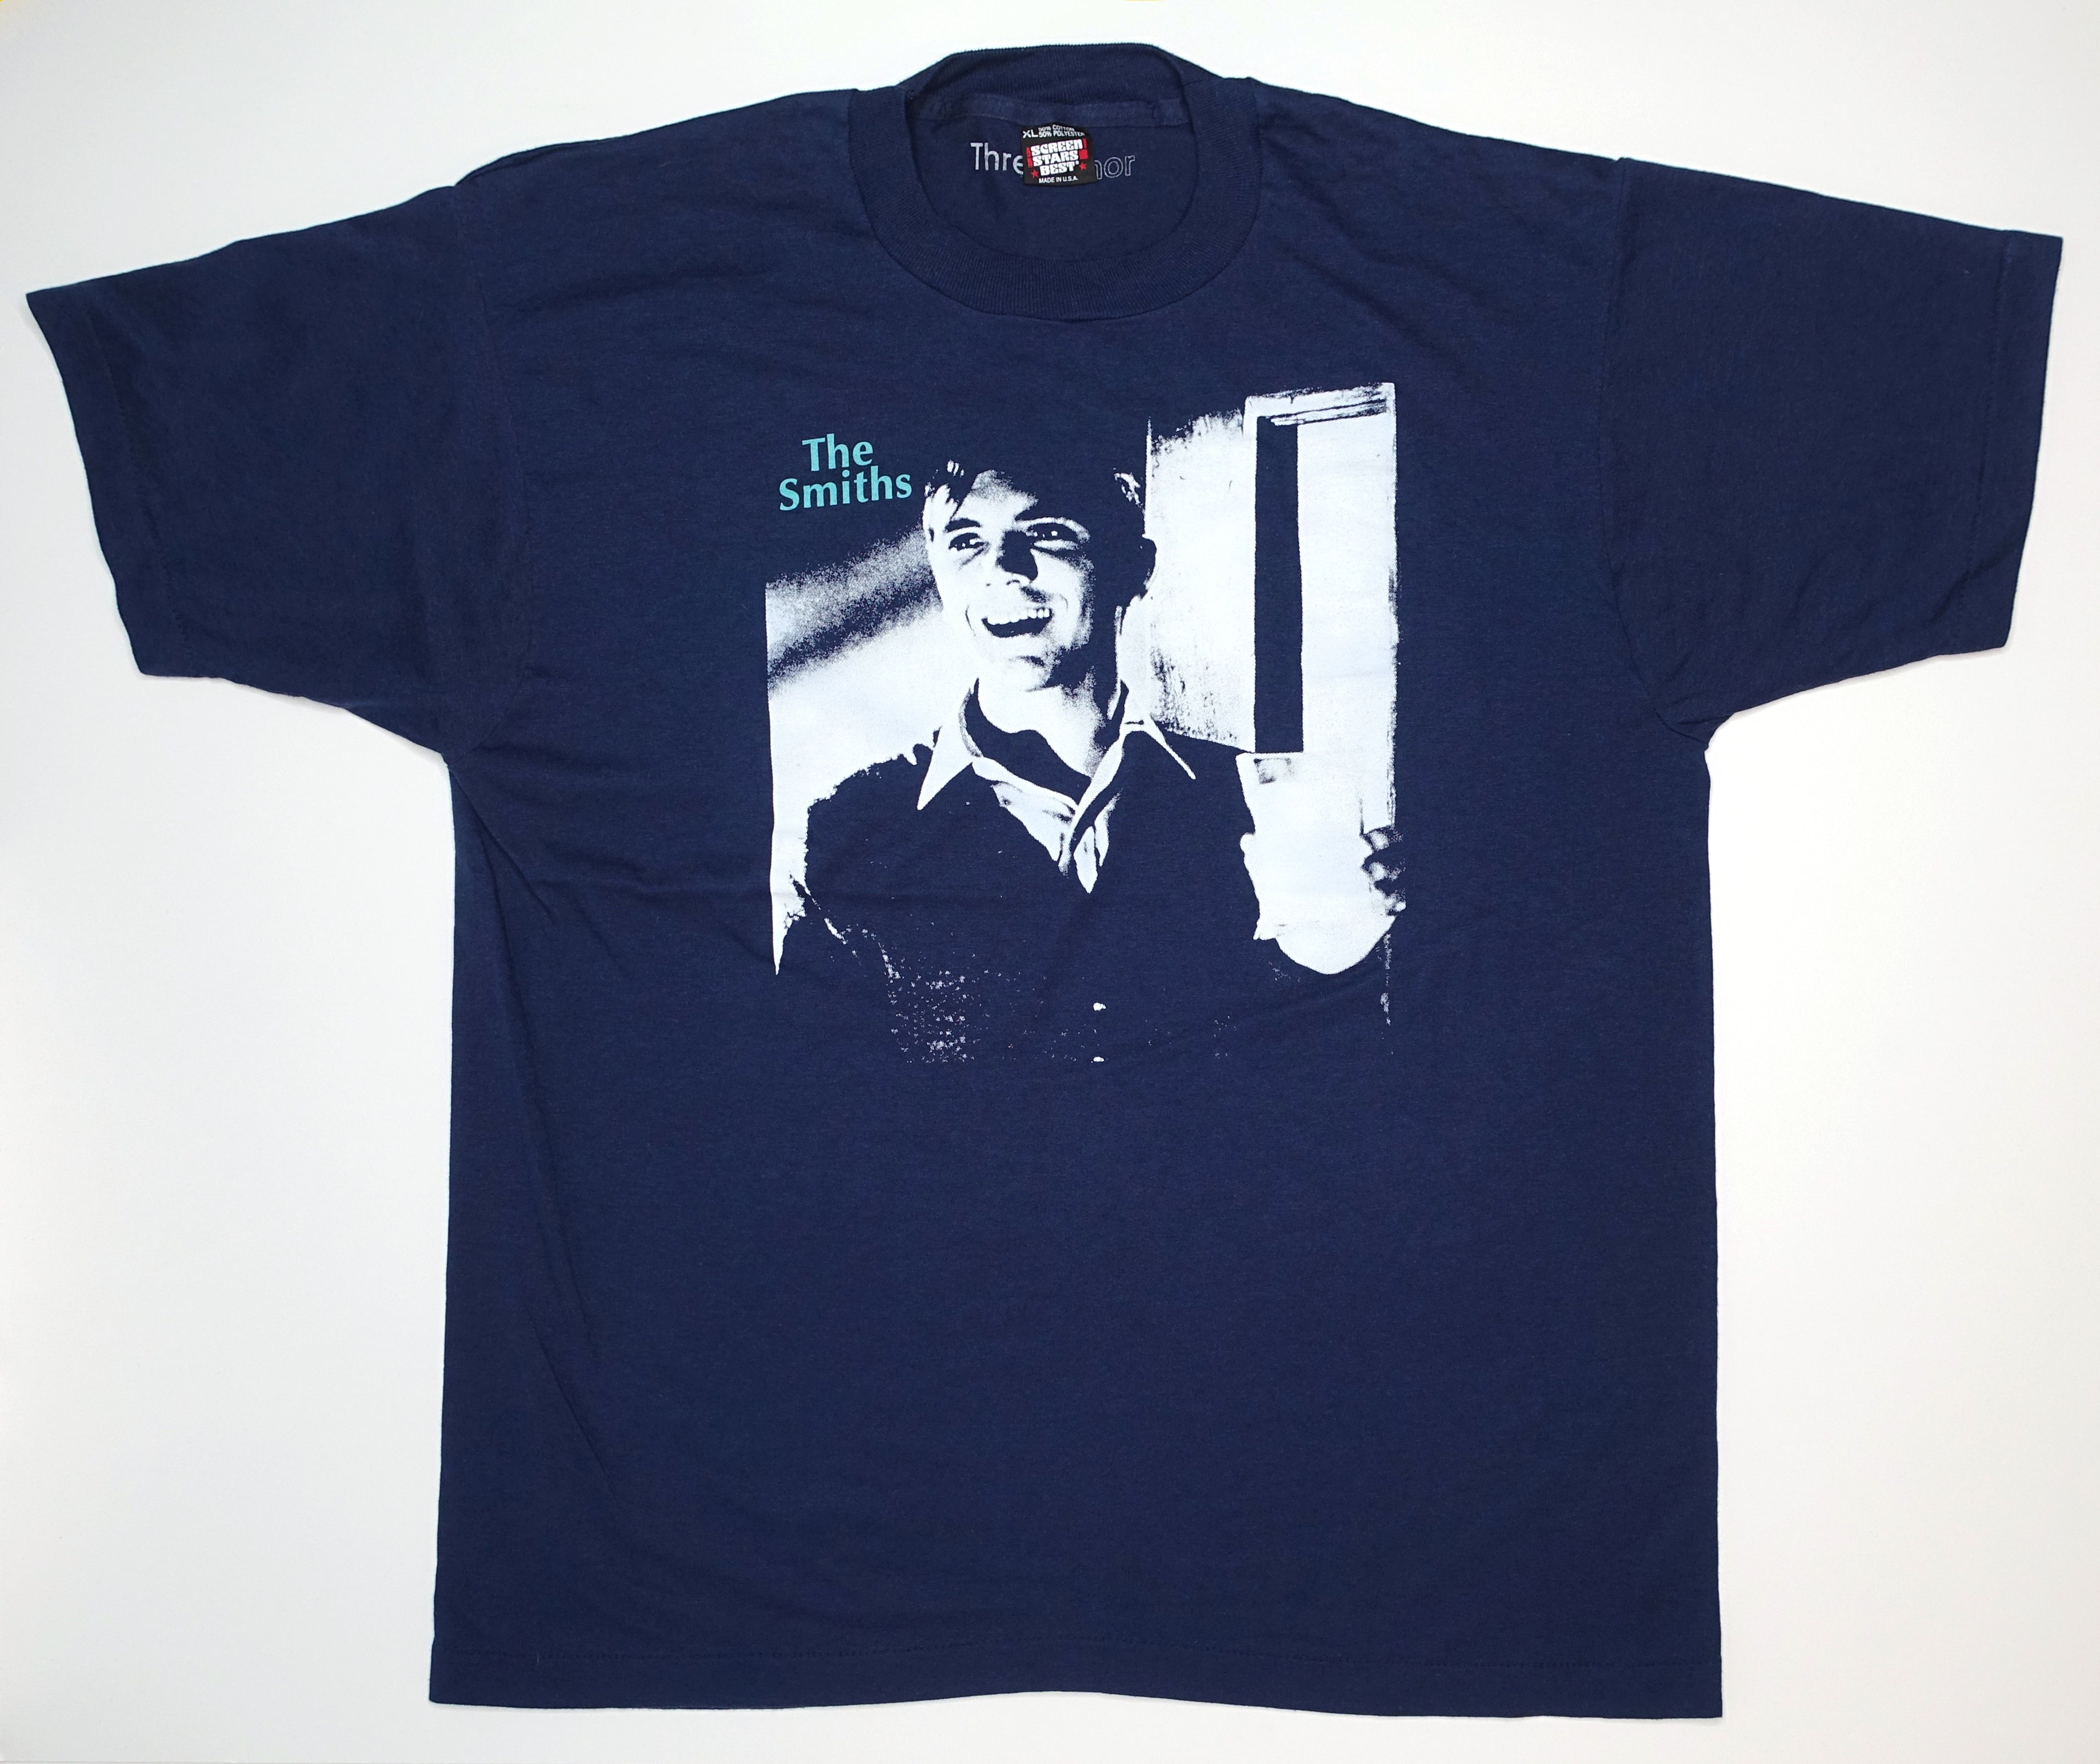 the Smiths - What Difference Does It Make? Navy Version Shirt (Bootleg by Me) Size XL